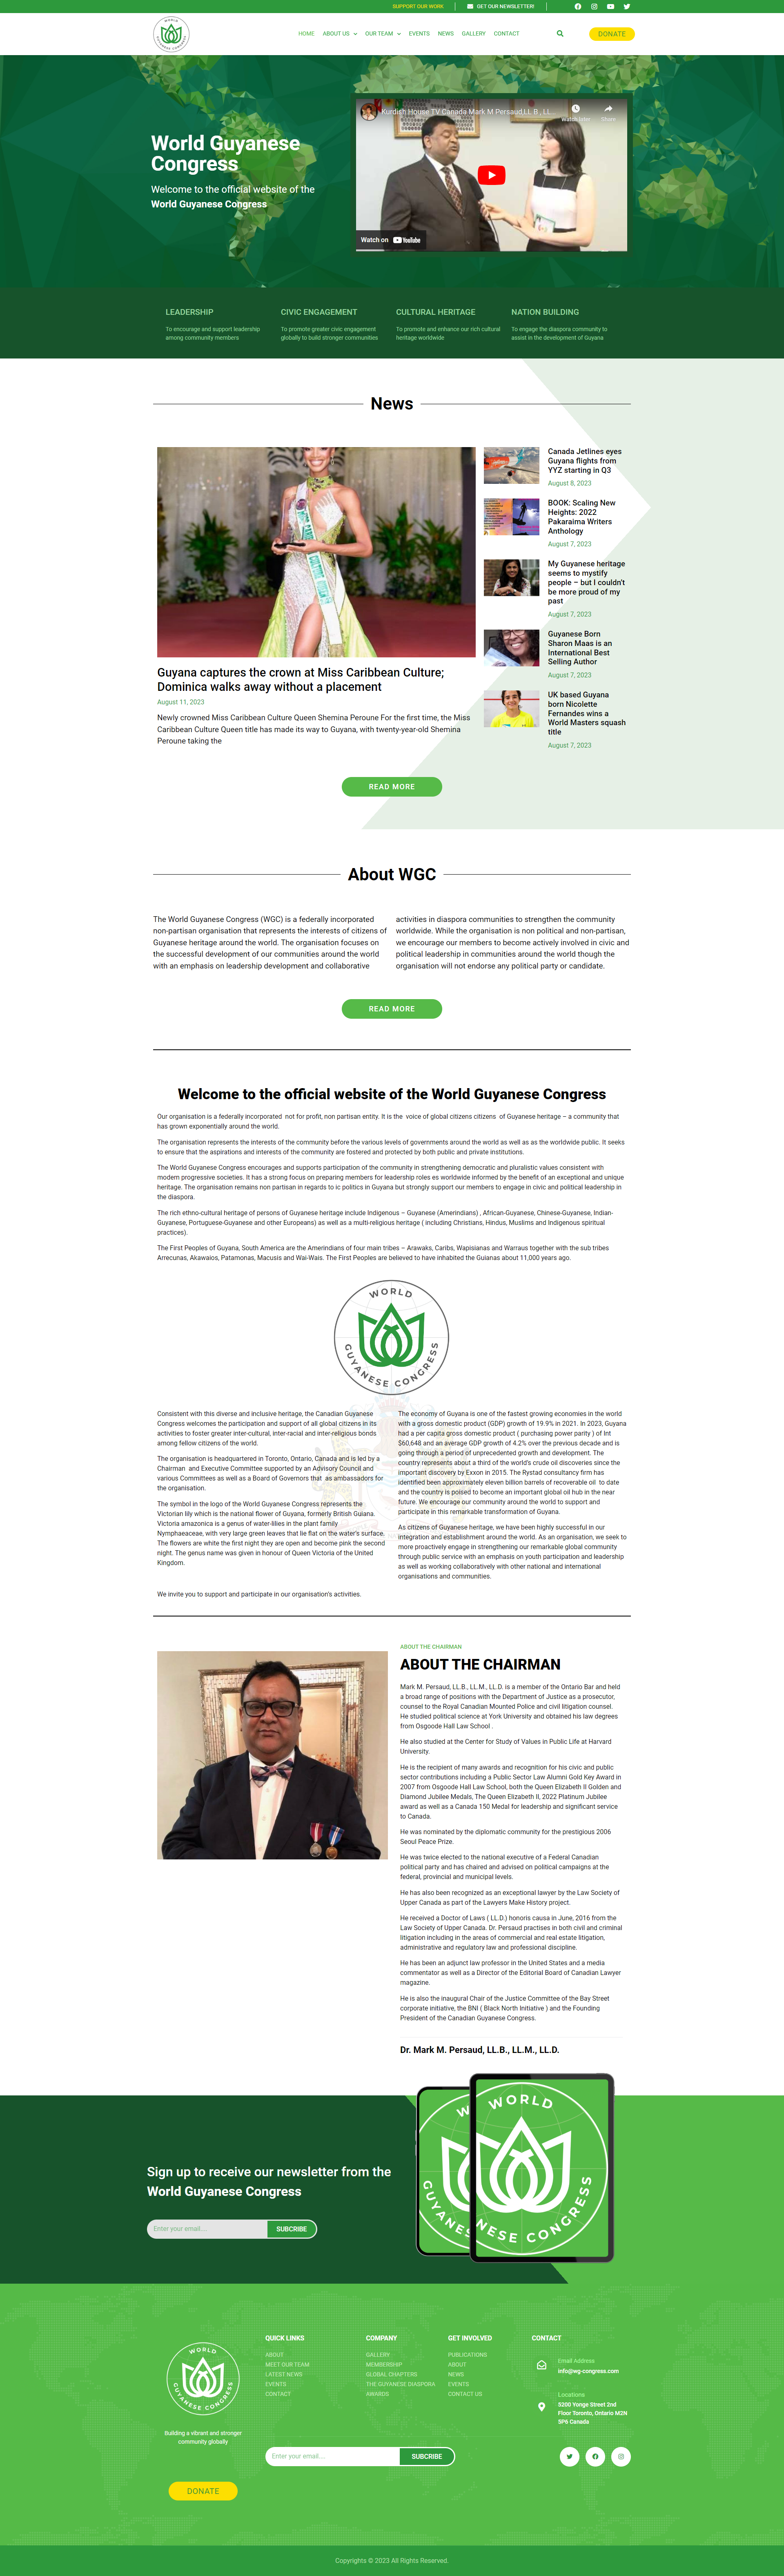 A green and white website design.